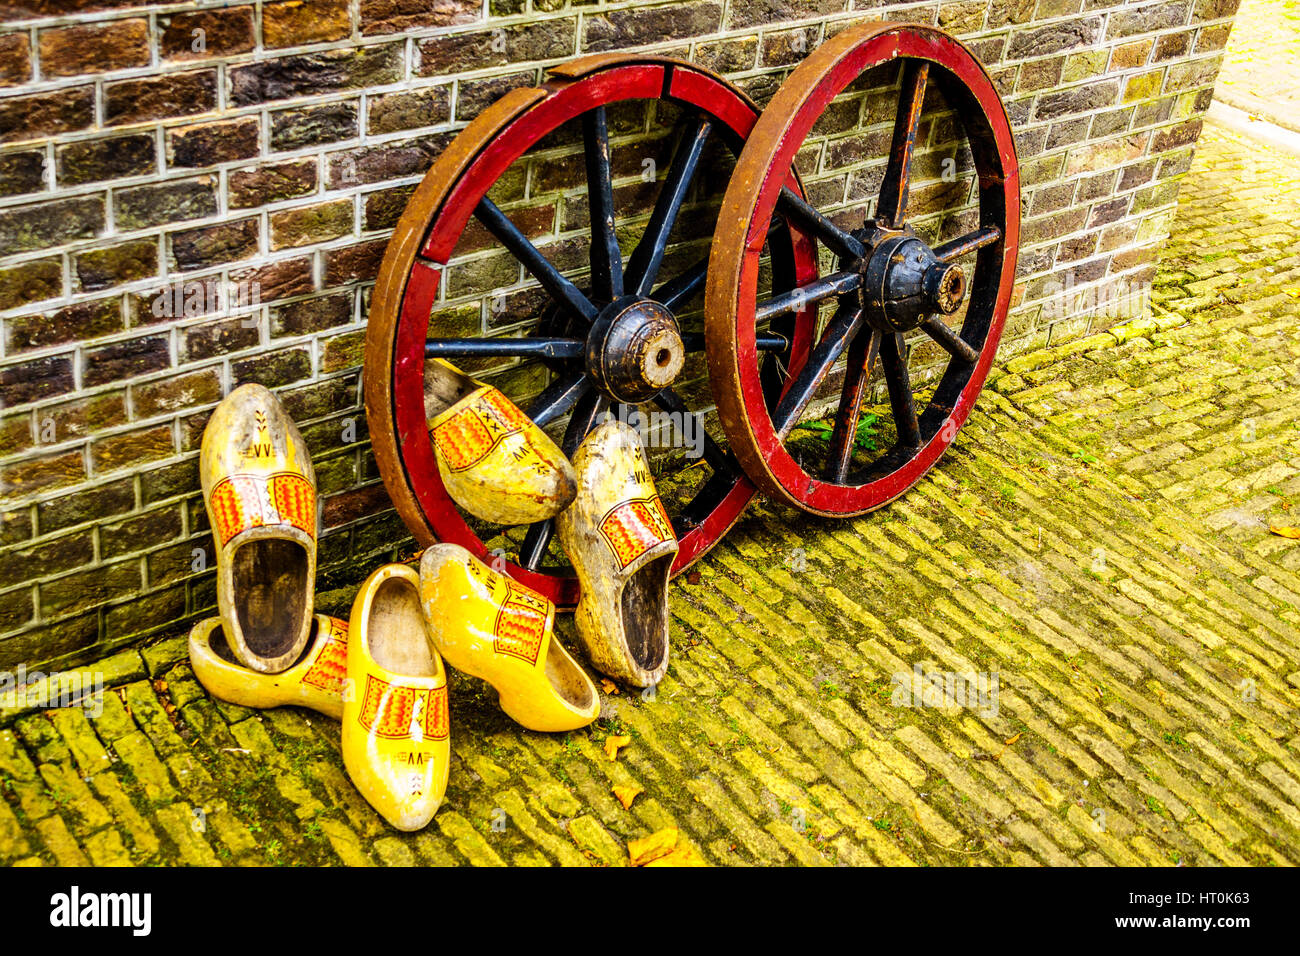 Old yellow painted Dutch Wooden Shoes resting against steel rimmed wooden Wagon Wheels with wooden spokes Stock Photo